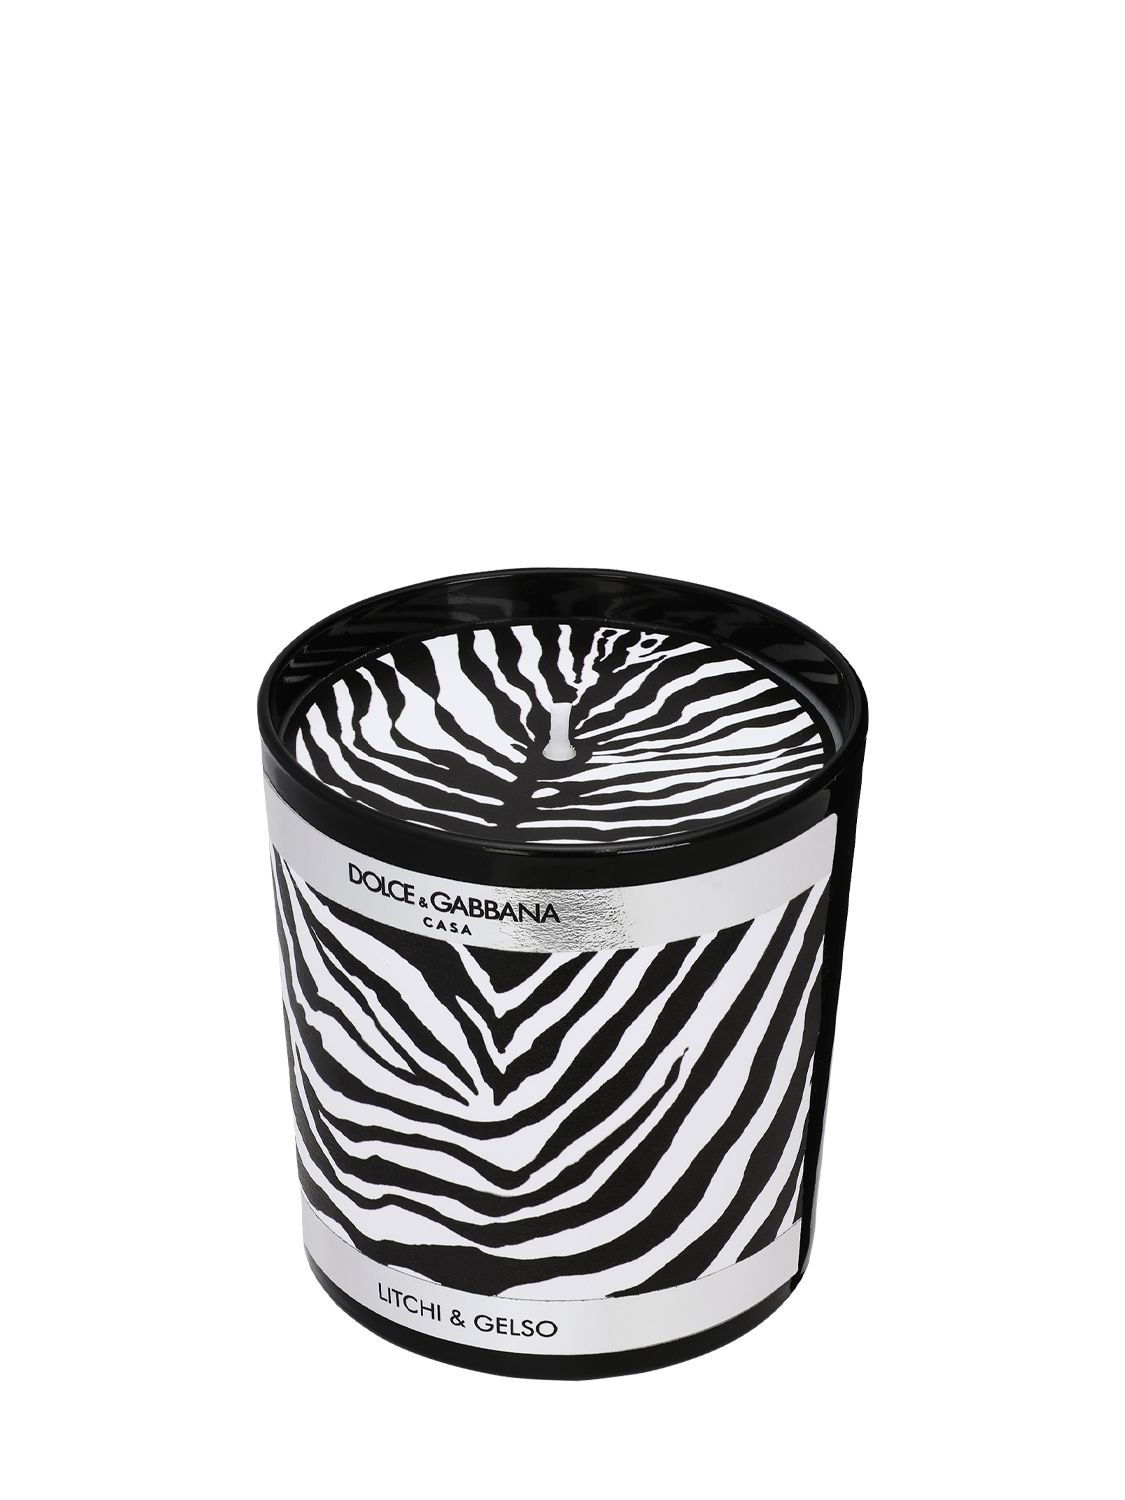 Shop Dolce & Gabbana 250gr Lychee & Mulberry Scented Candle In Black,white